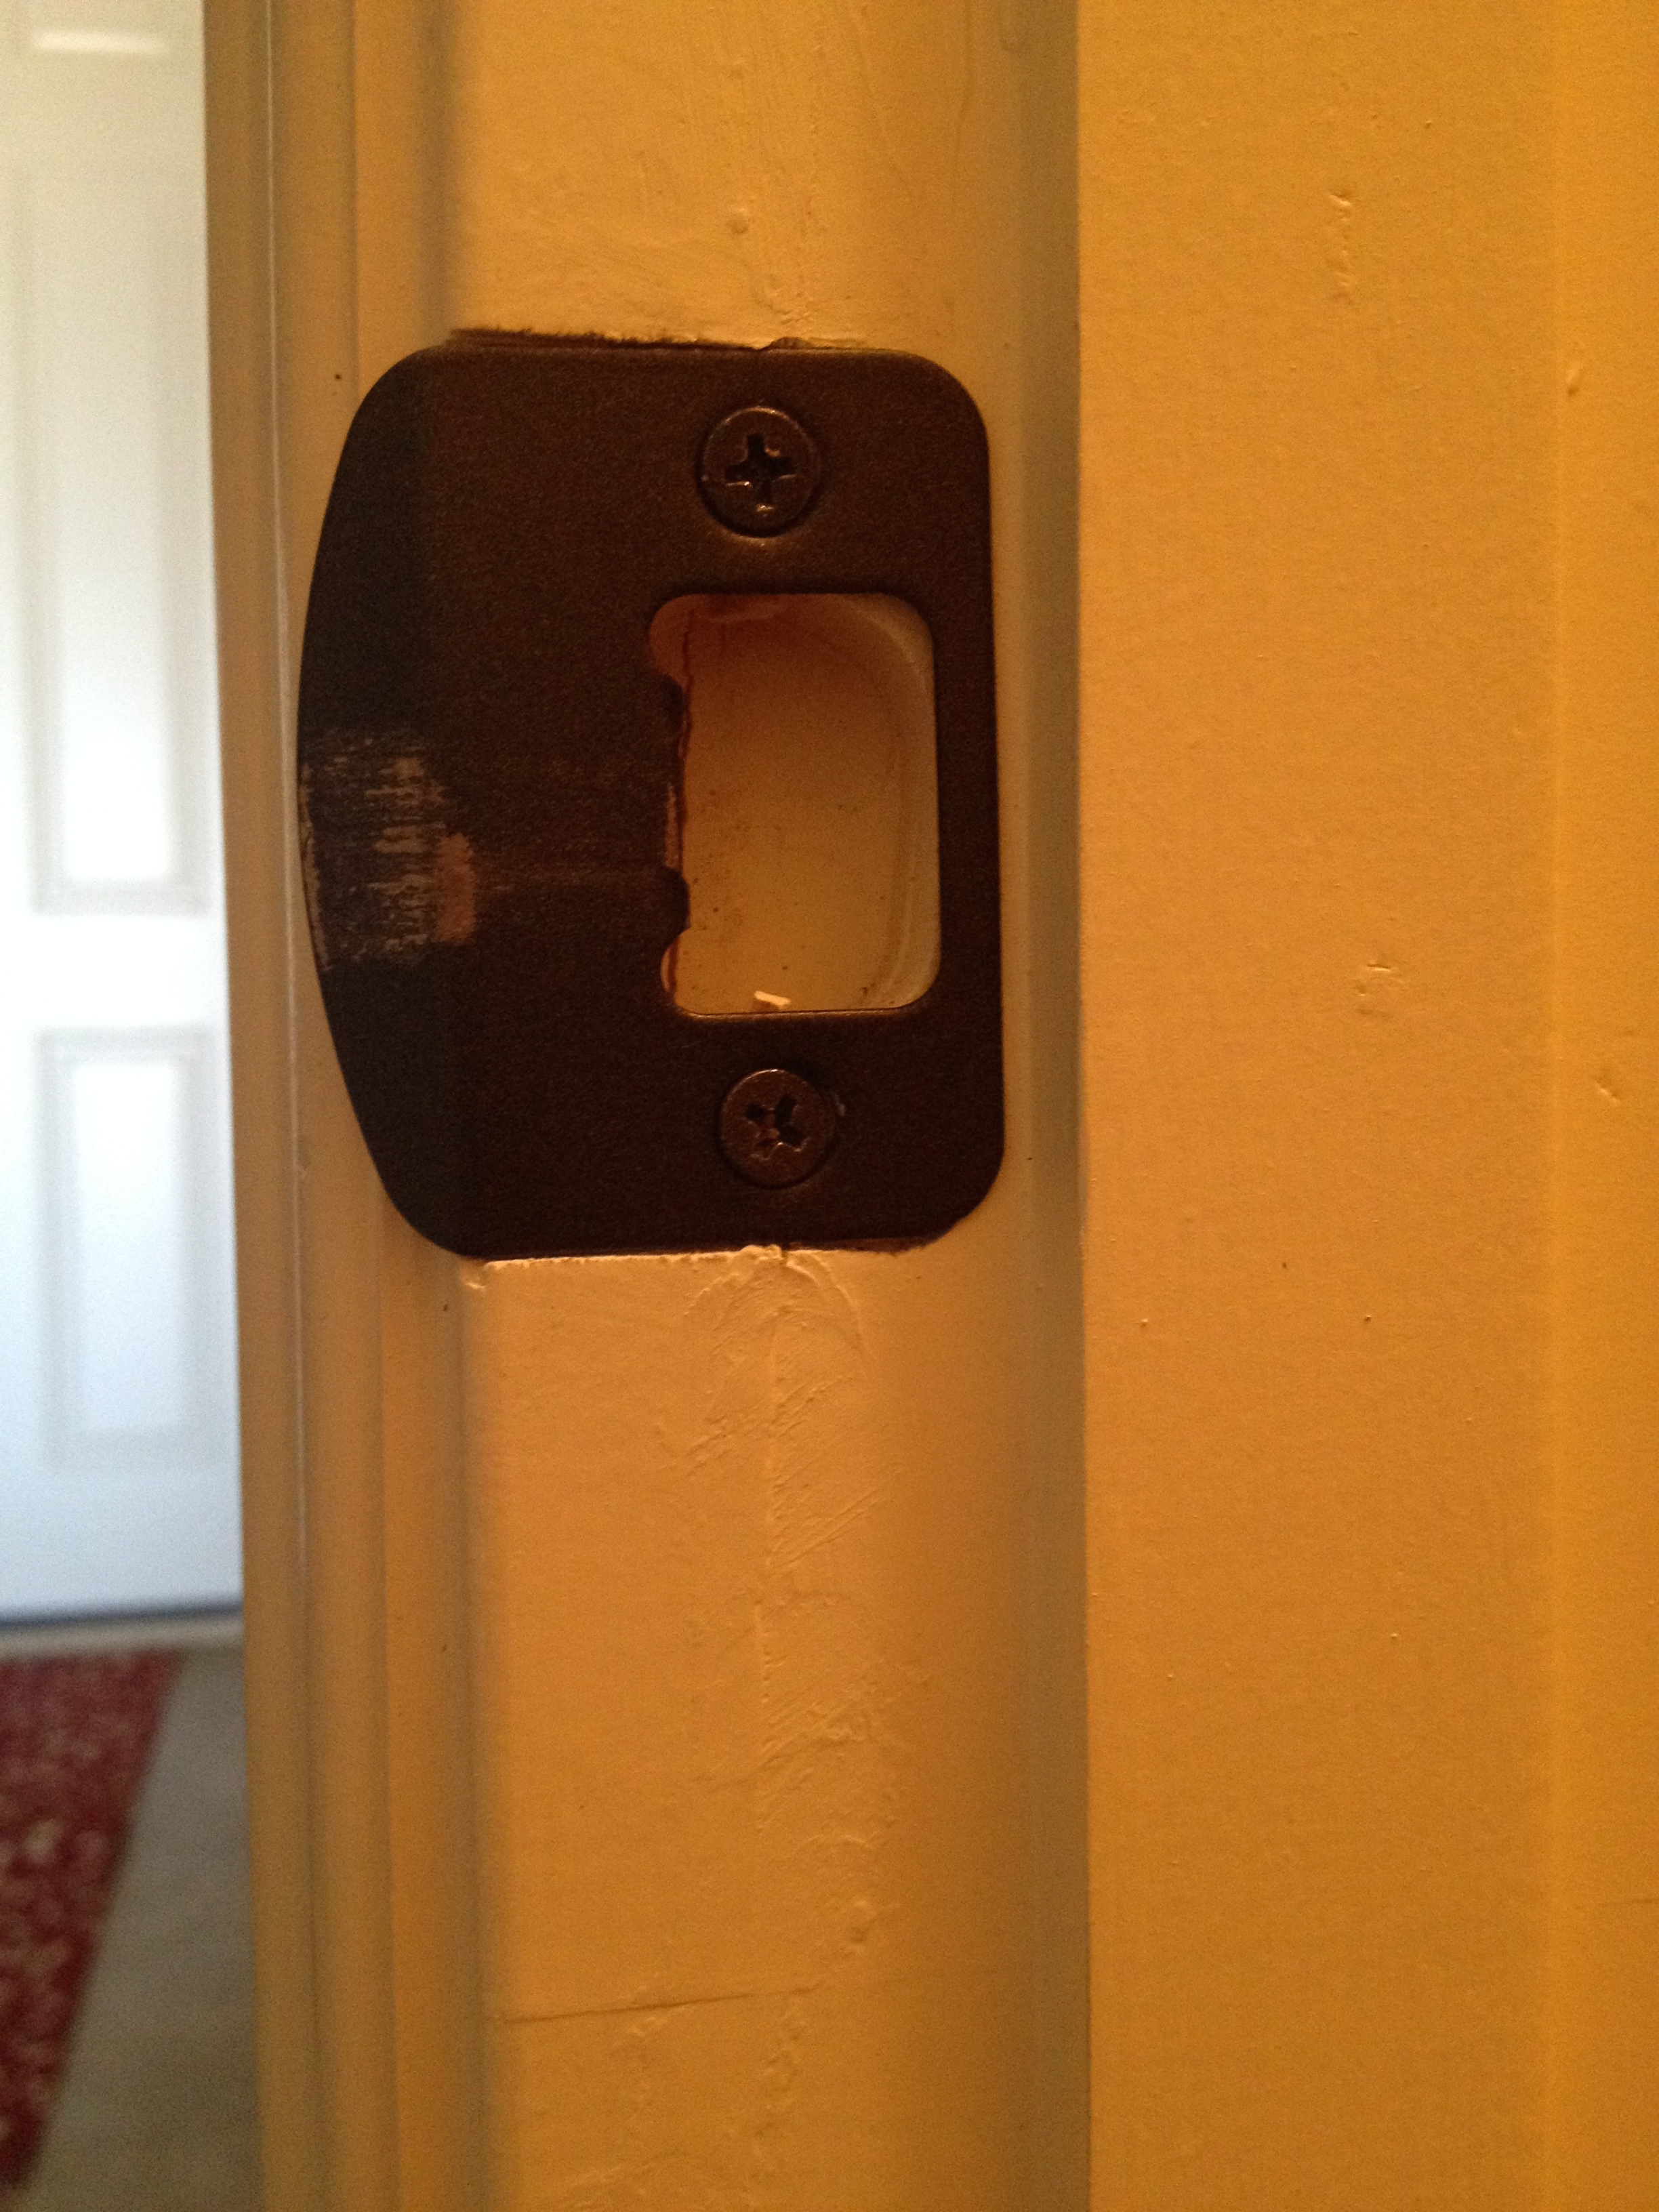 Rust-Oleum Oil-Rubbed Bronze this is what really happens with the product